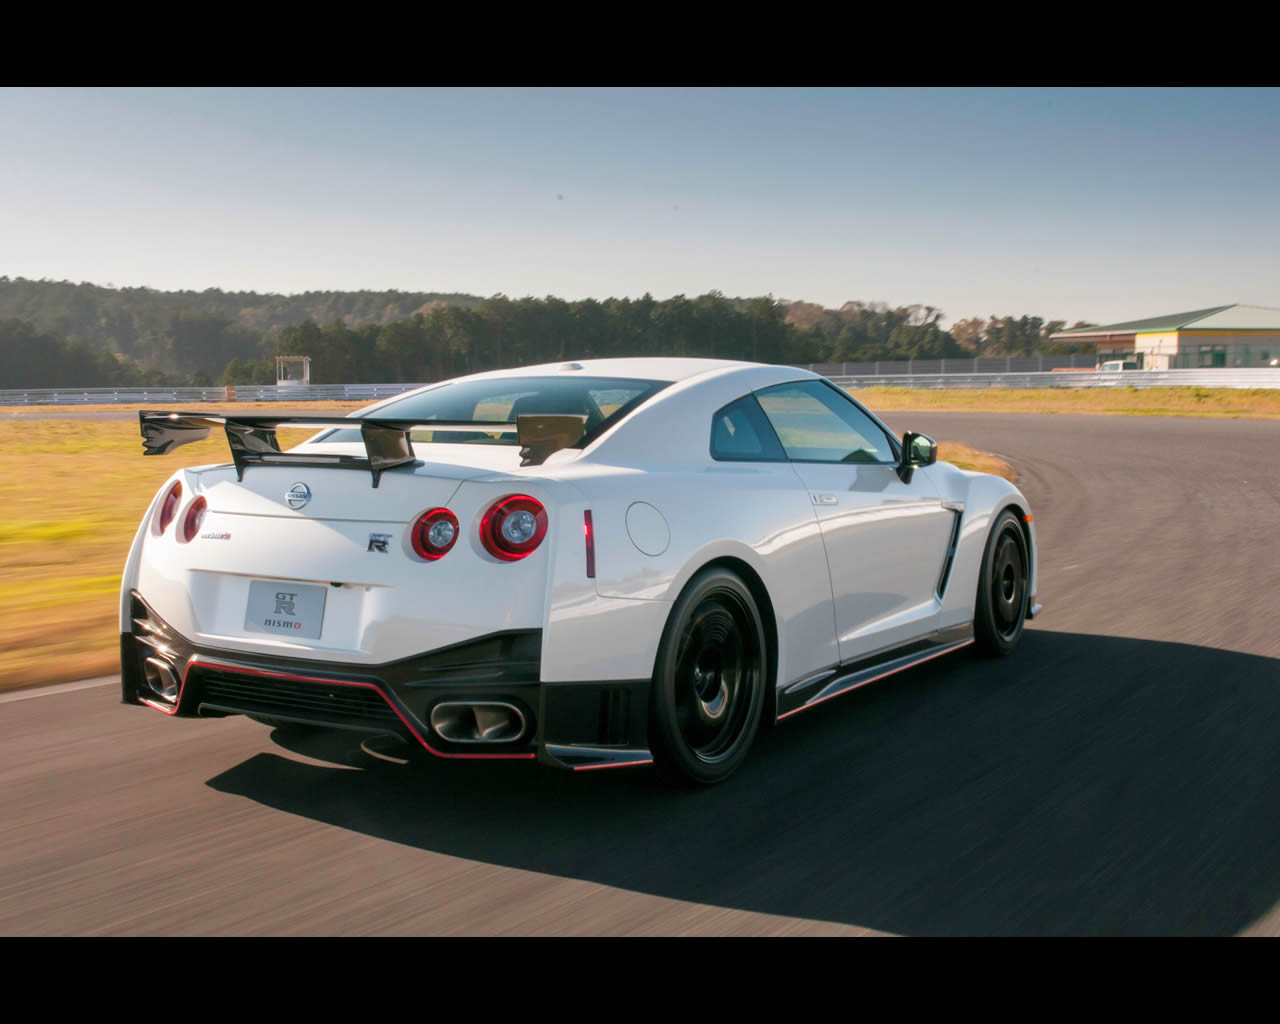 Wallpaper Nissan Gt R Nismo Click On Image To Enlarge